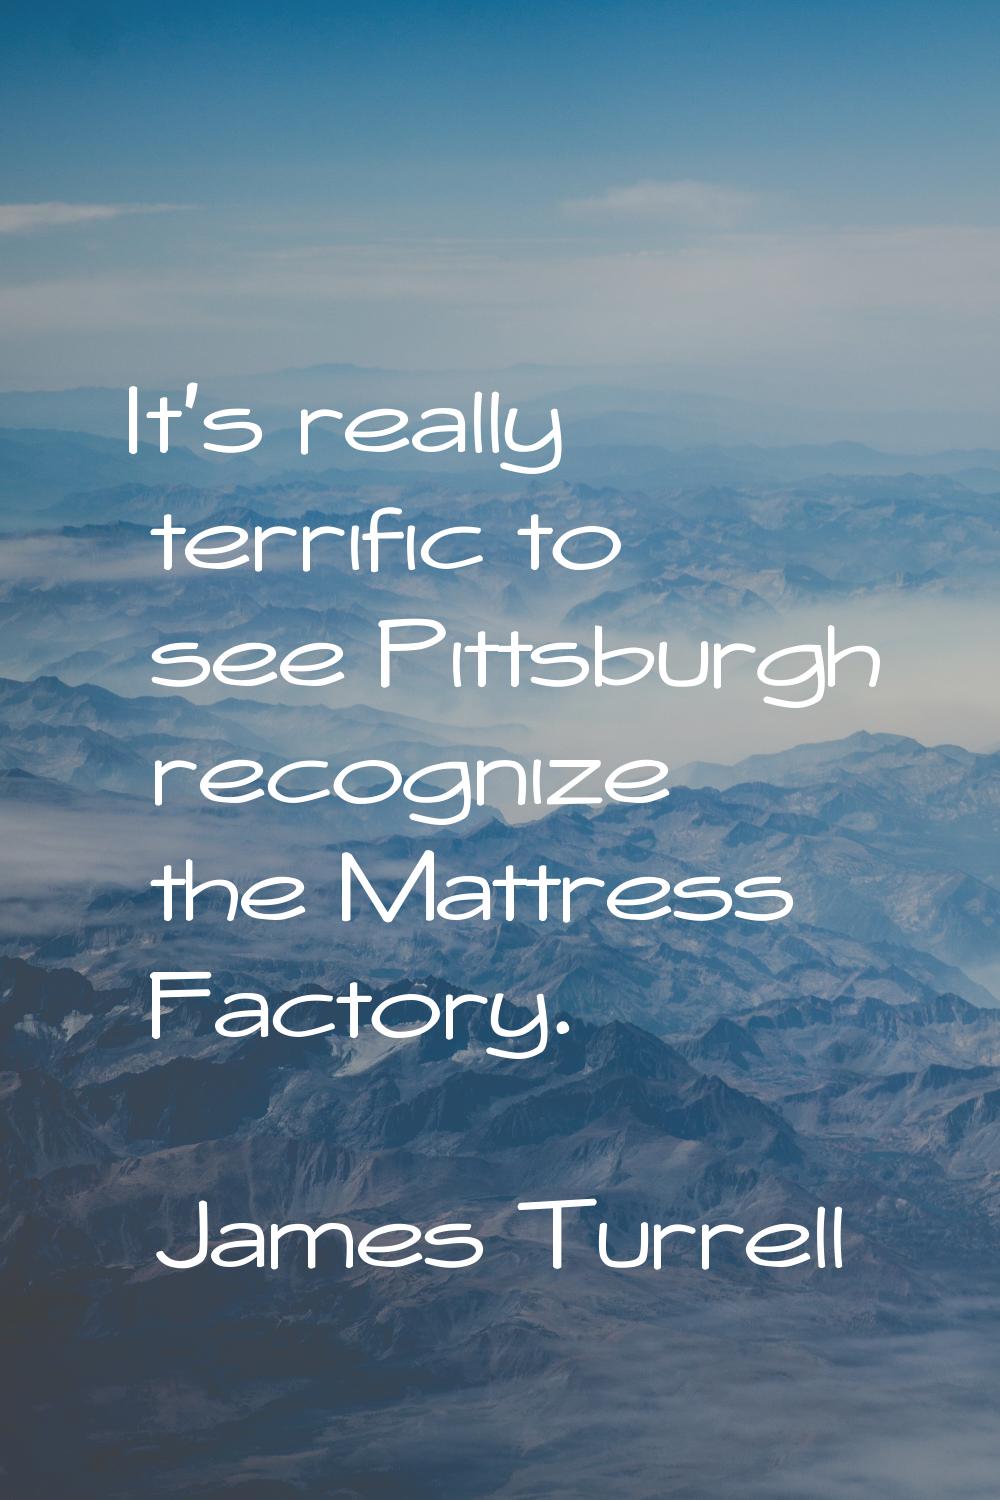 It's really terrific to see Pittsburgh recognize the Mattress Factory.